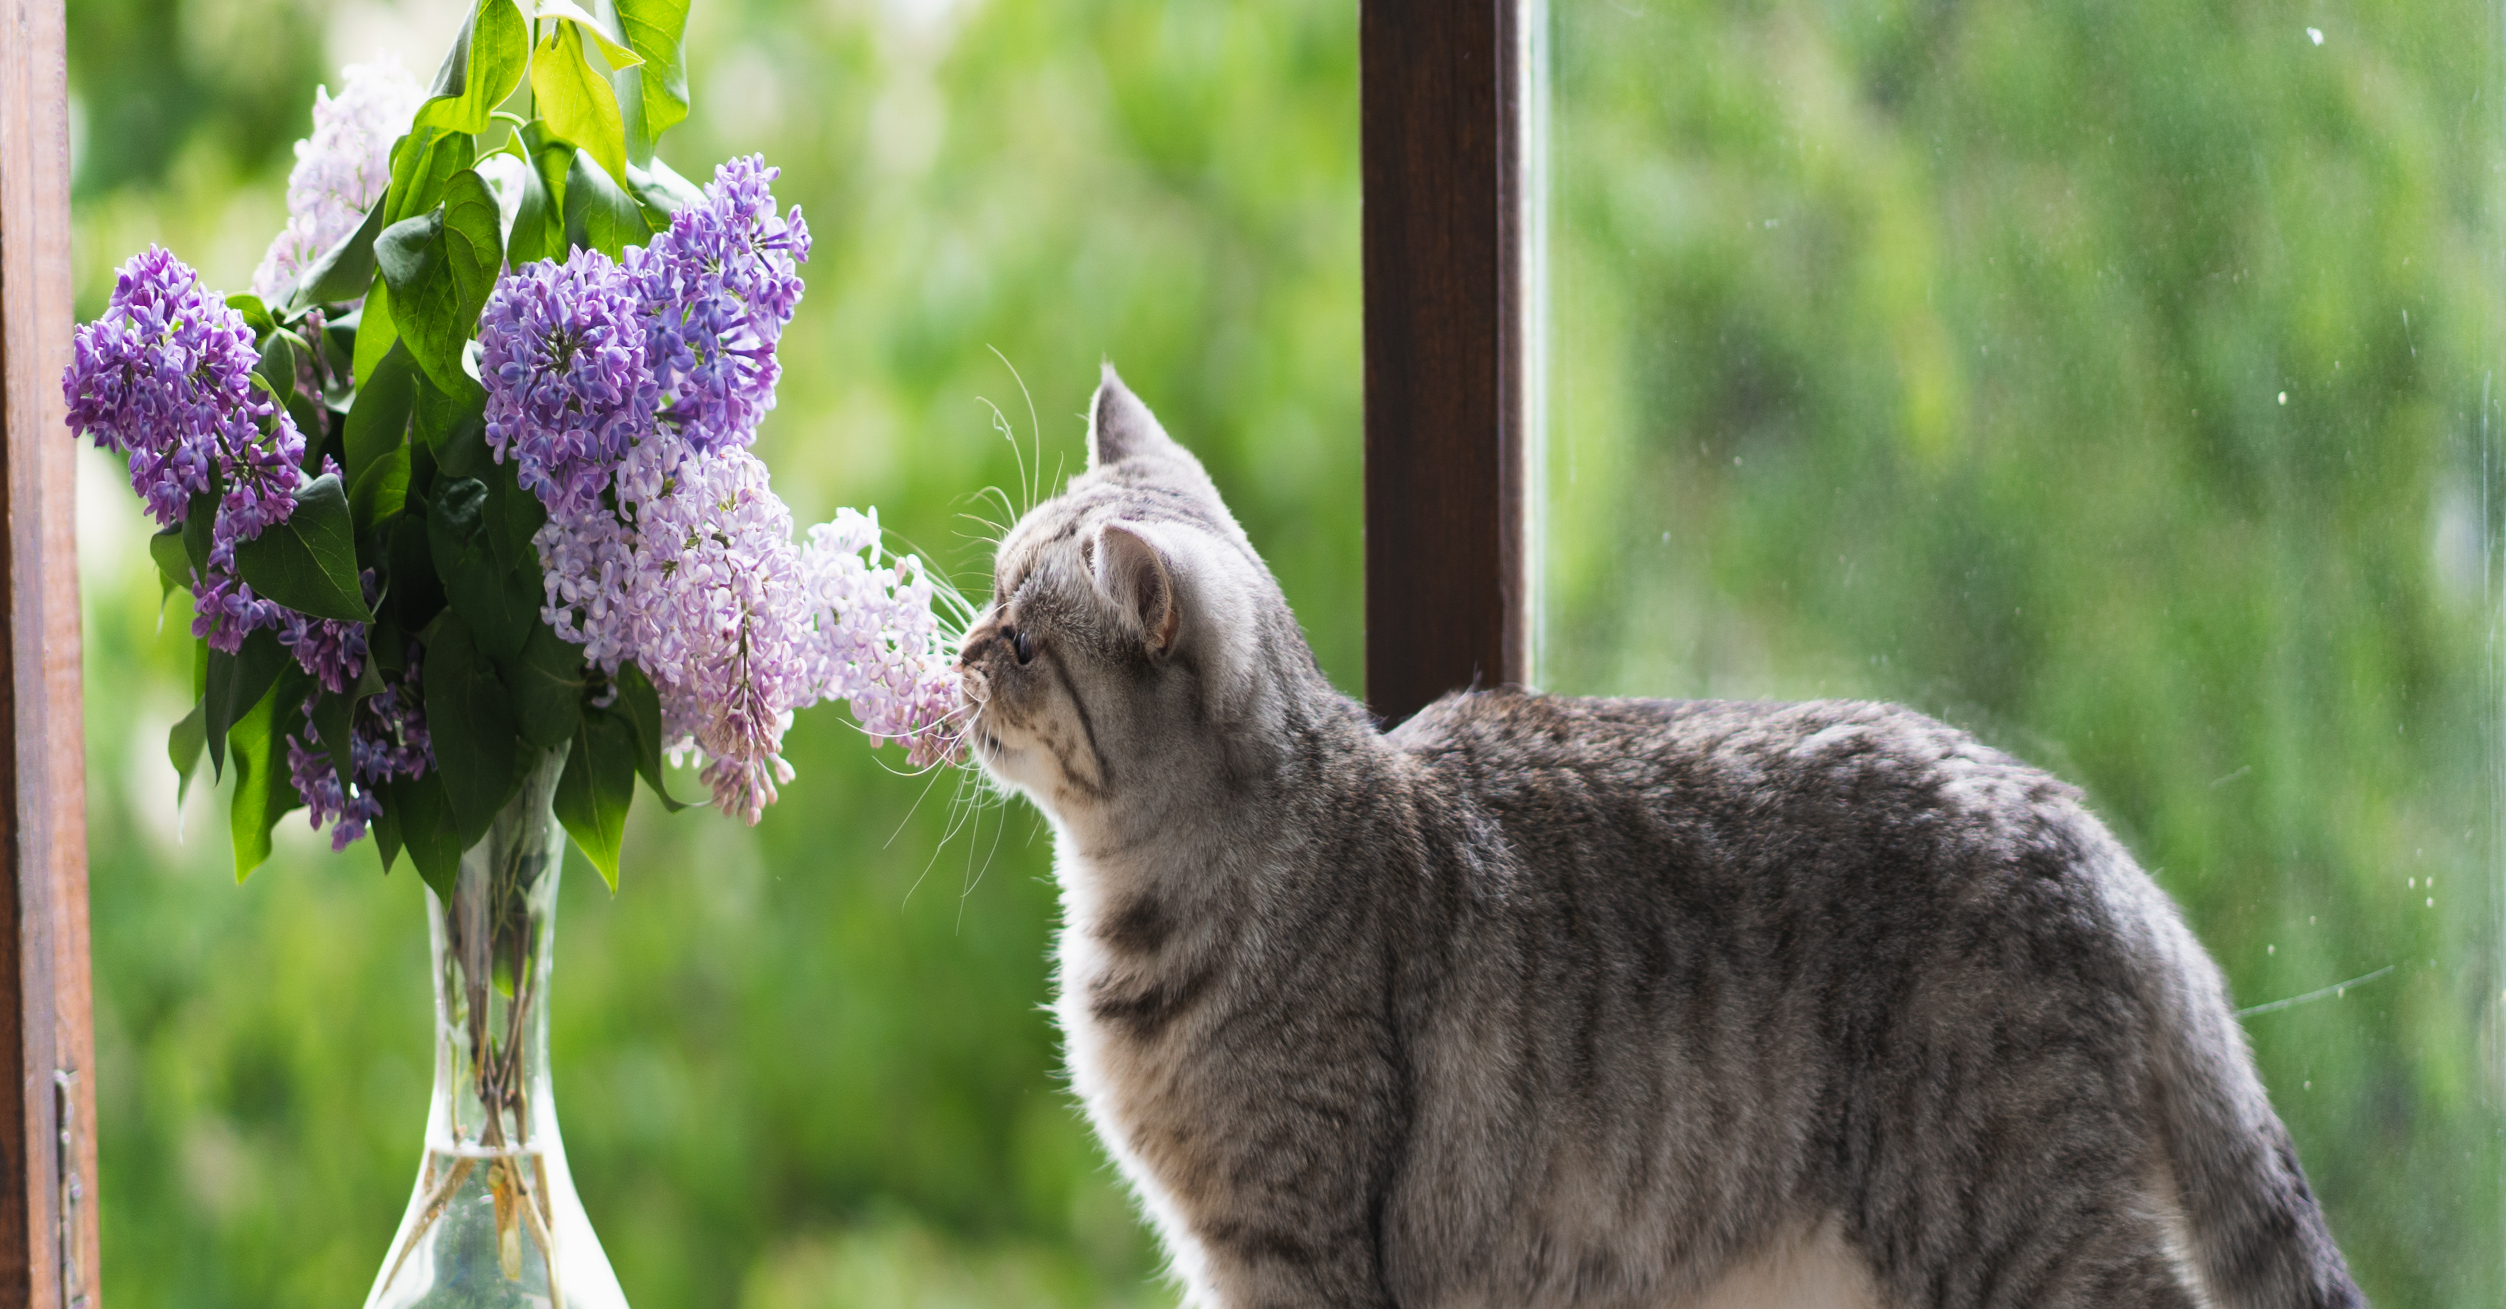 Easter Plants You Need to Keep Away from Pets | Hastings Veterinary Hospital